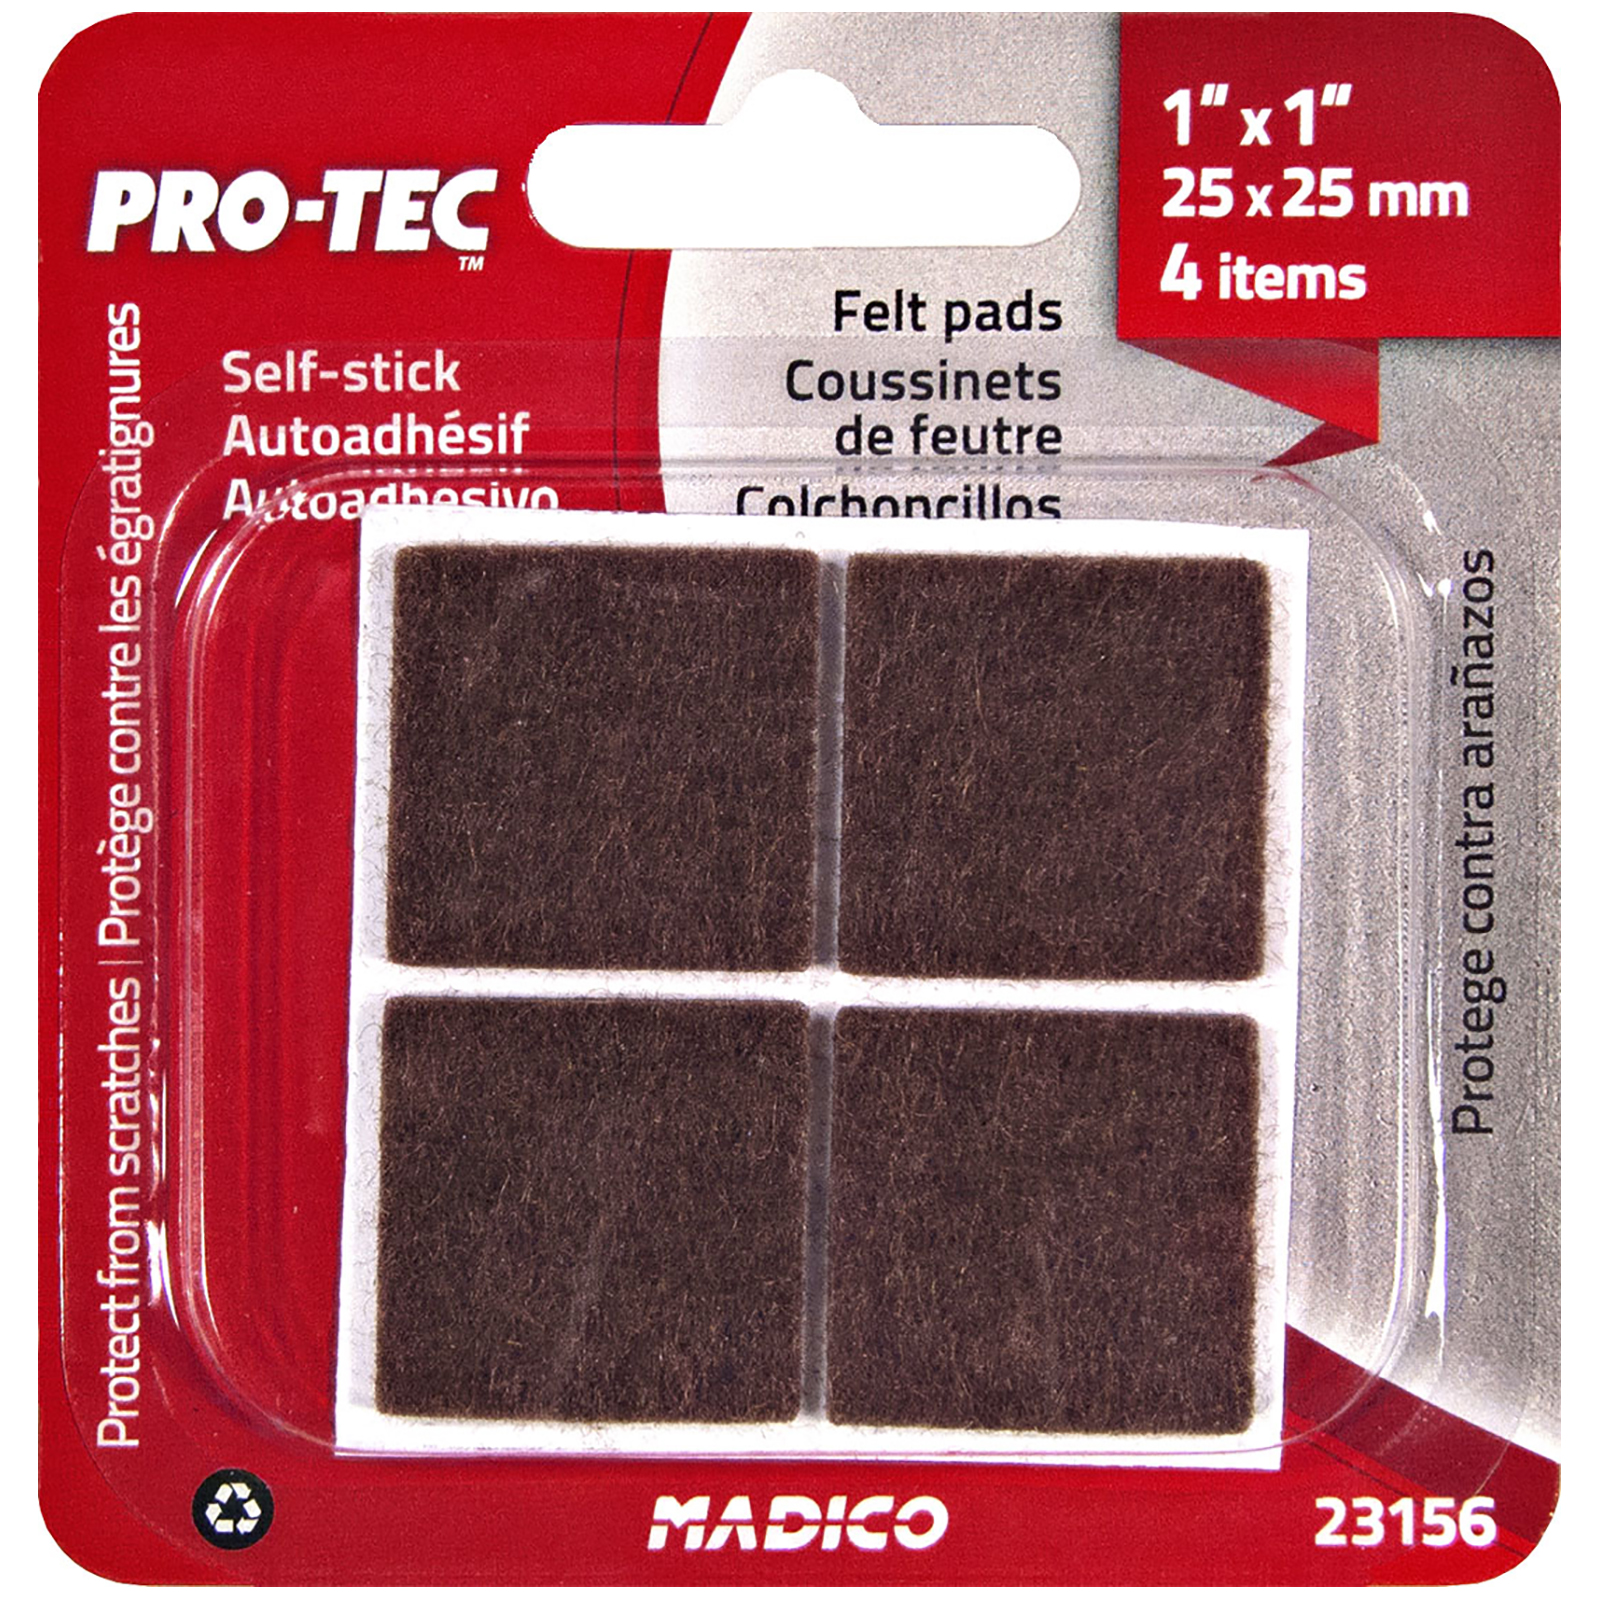 Madico 25mm Brown Square Felt Protec Surface Saver - 4 Pack